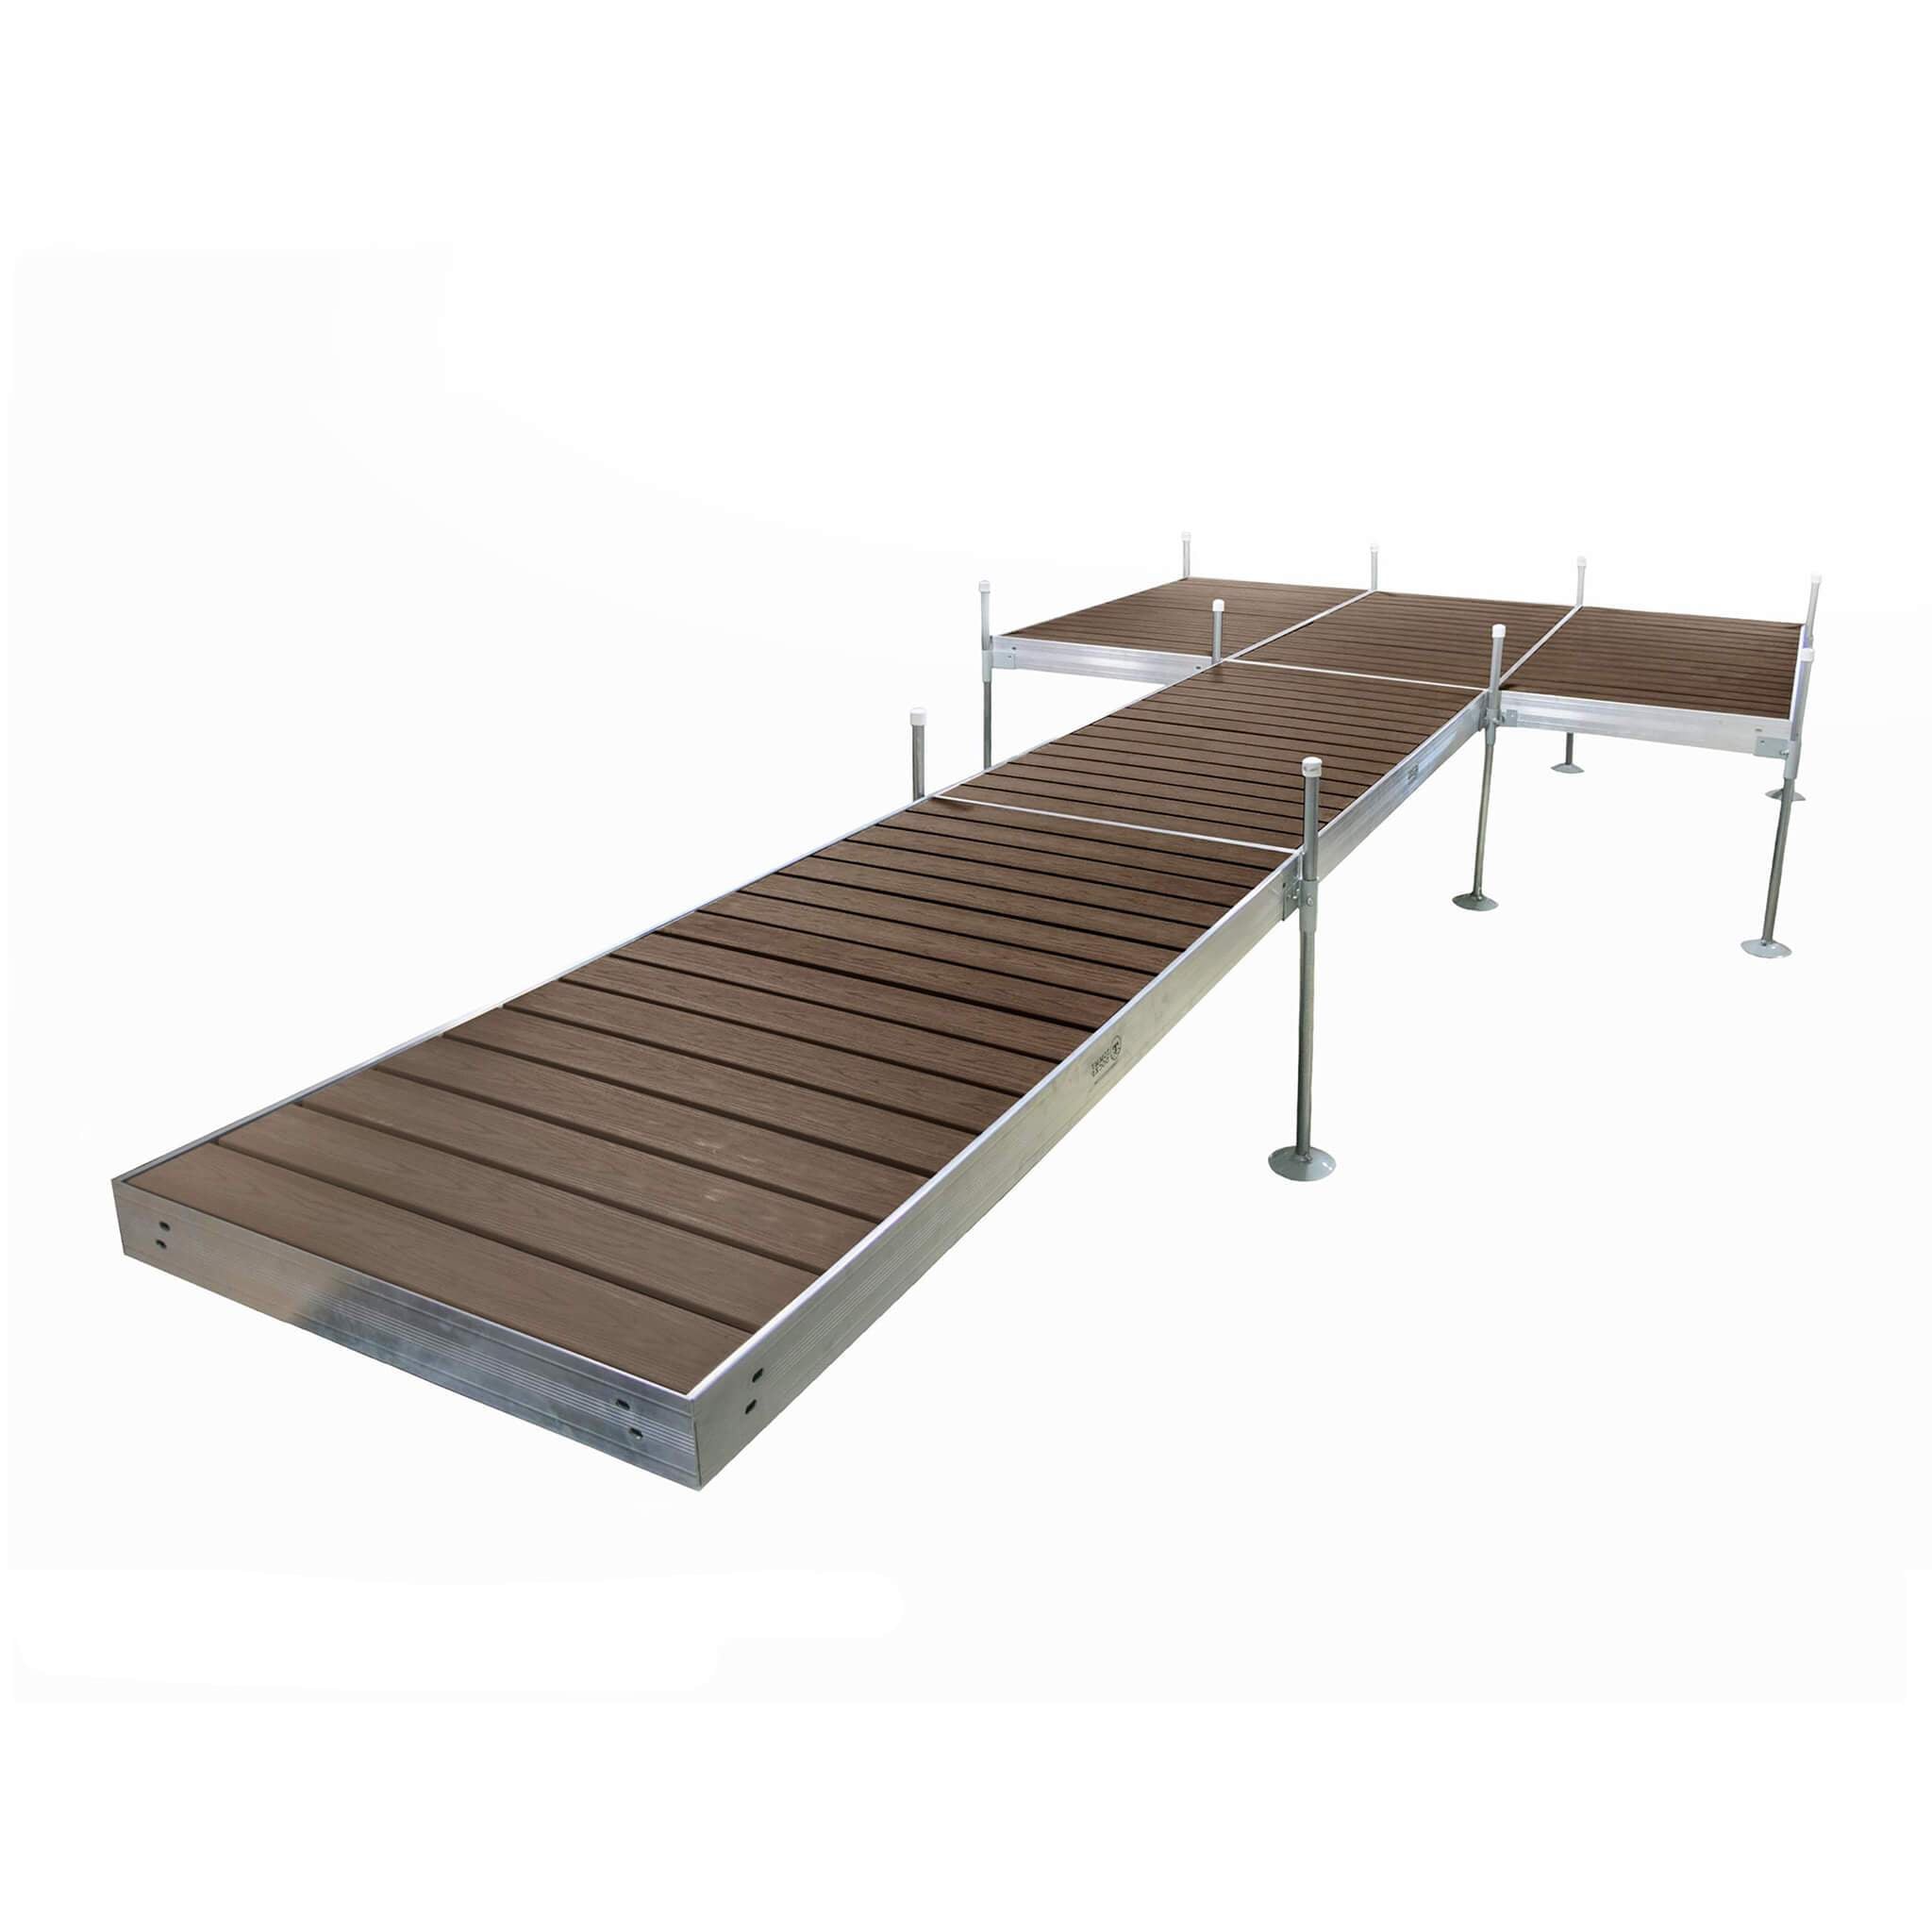 24' PLATFORM-STYLE ALUMINUM FRAME WITH COMPOSITE DECKING COMPLETE DOCK PACKAGE - WOODLAND BROWN